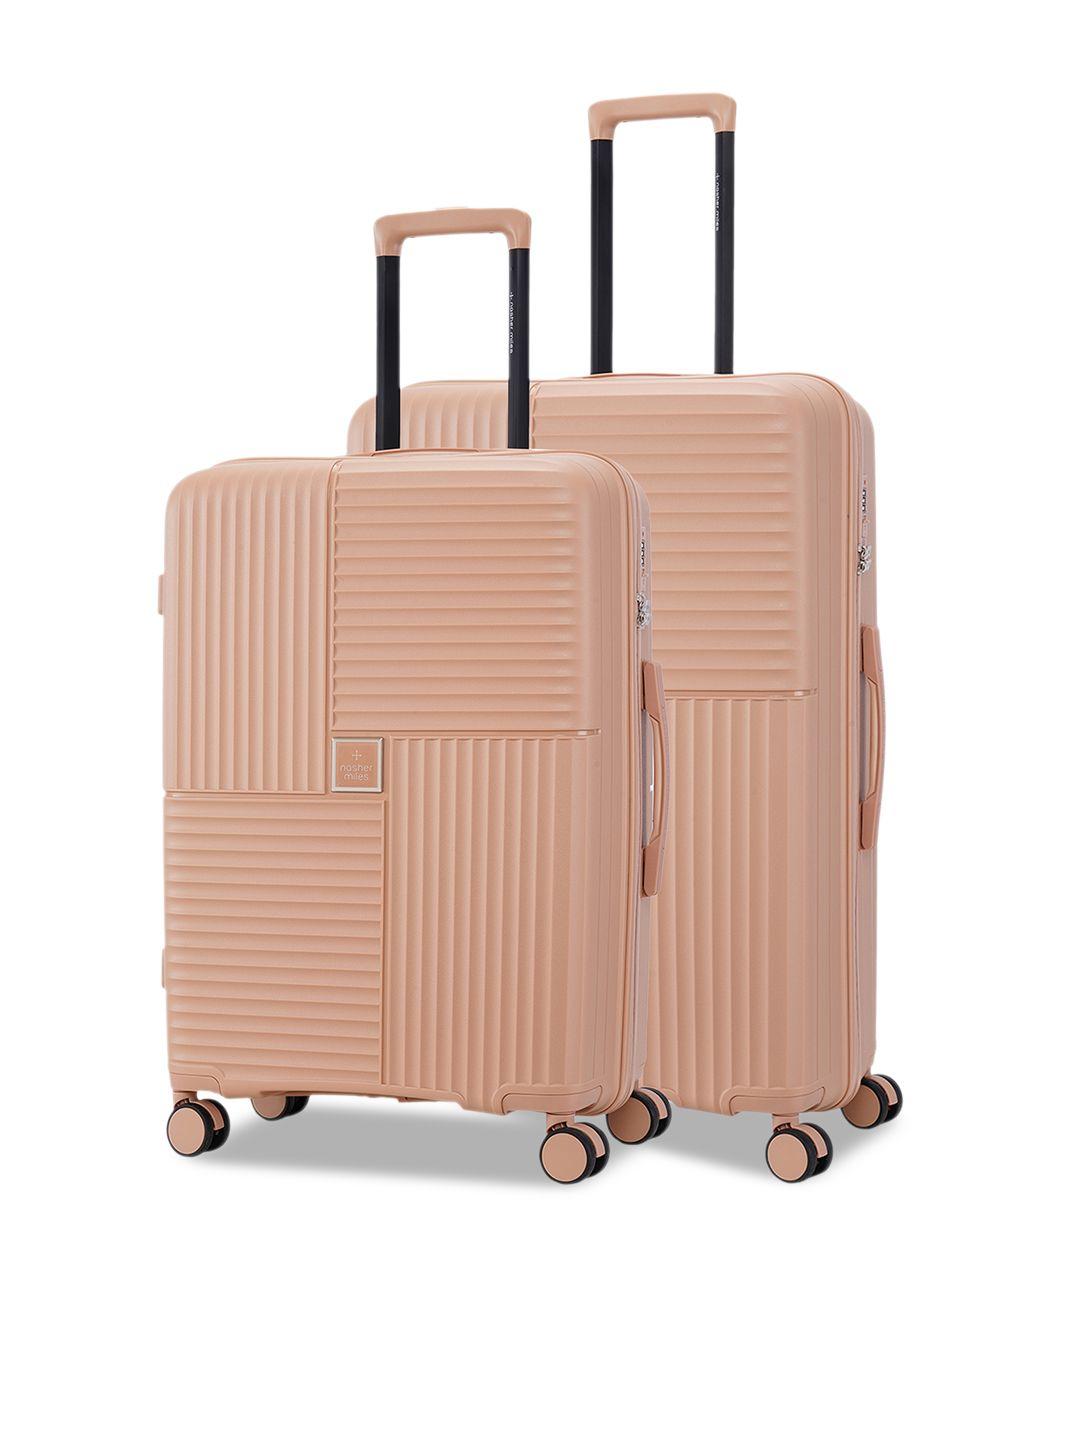 nasher miles polo class set of 2 textured hard-sided water resistance trolley suitcases